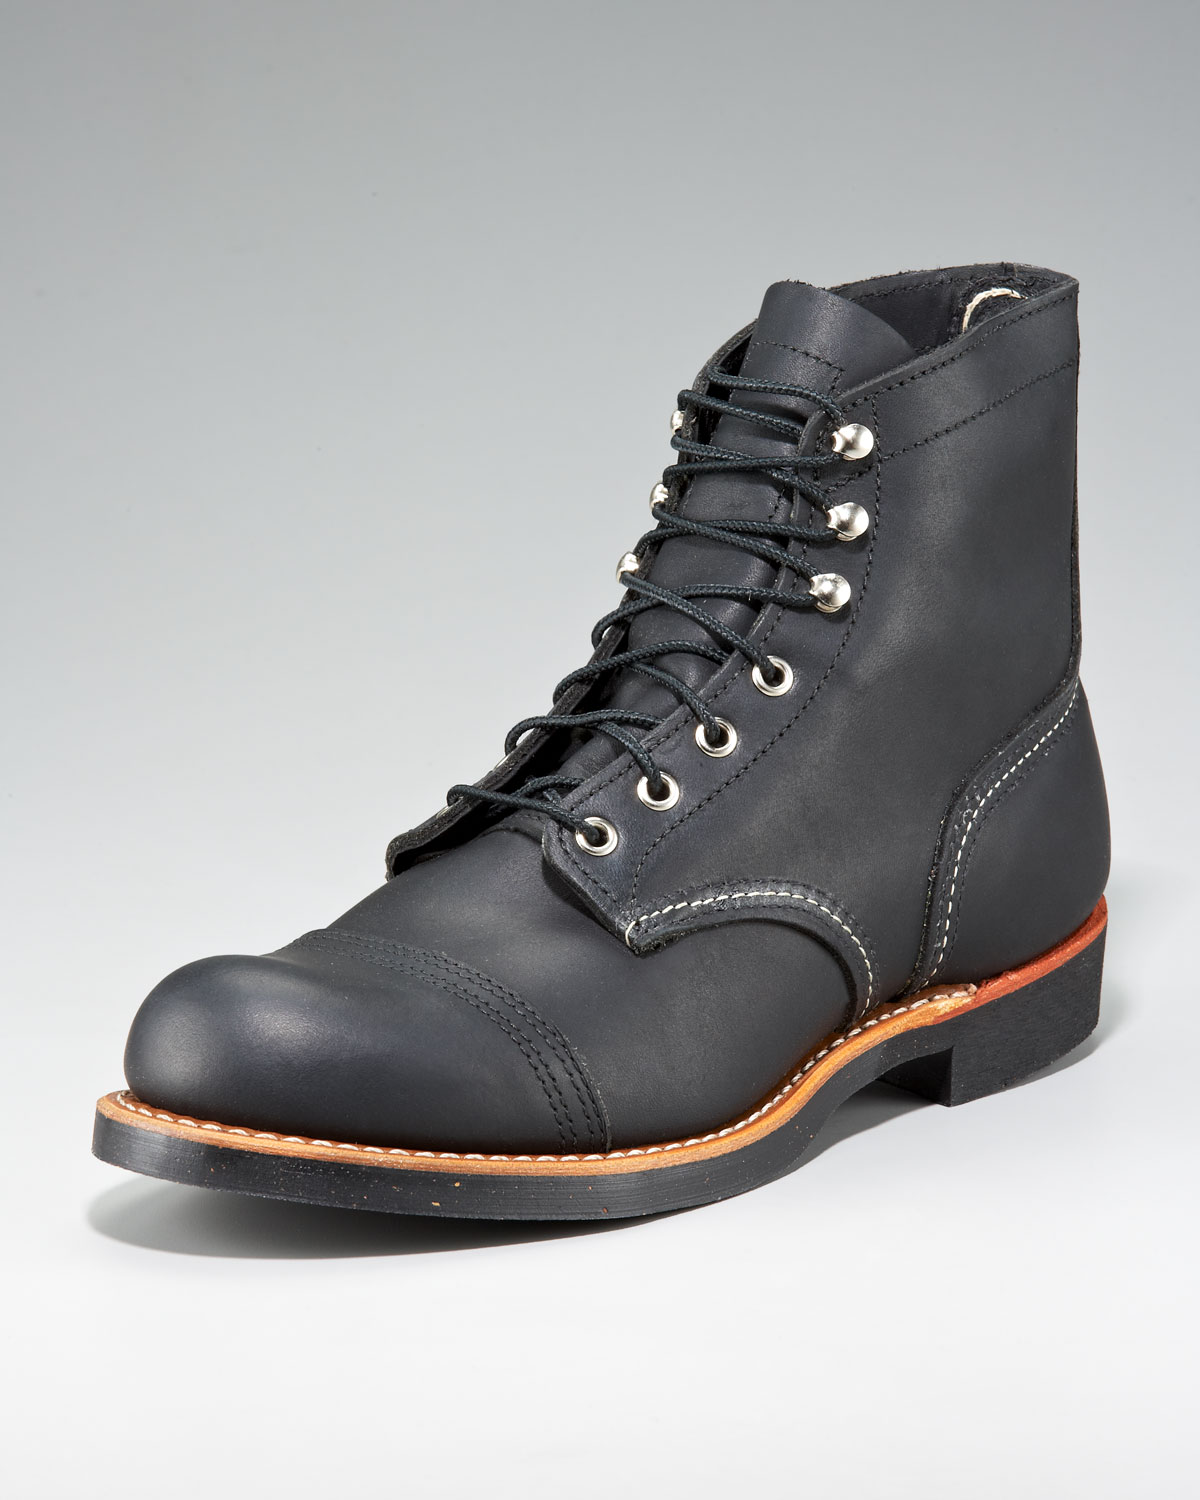 Lyst - Red Wing Iron Ranger Boot in Black for Men